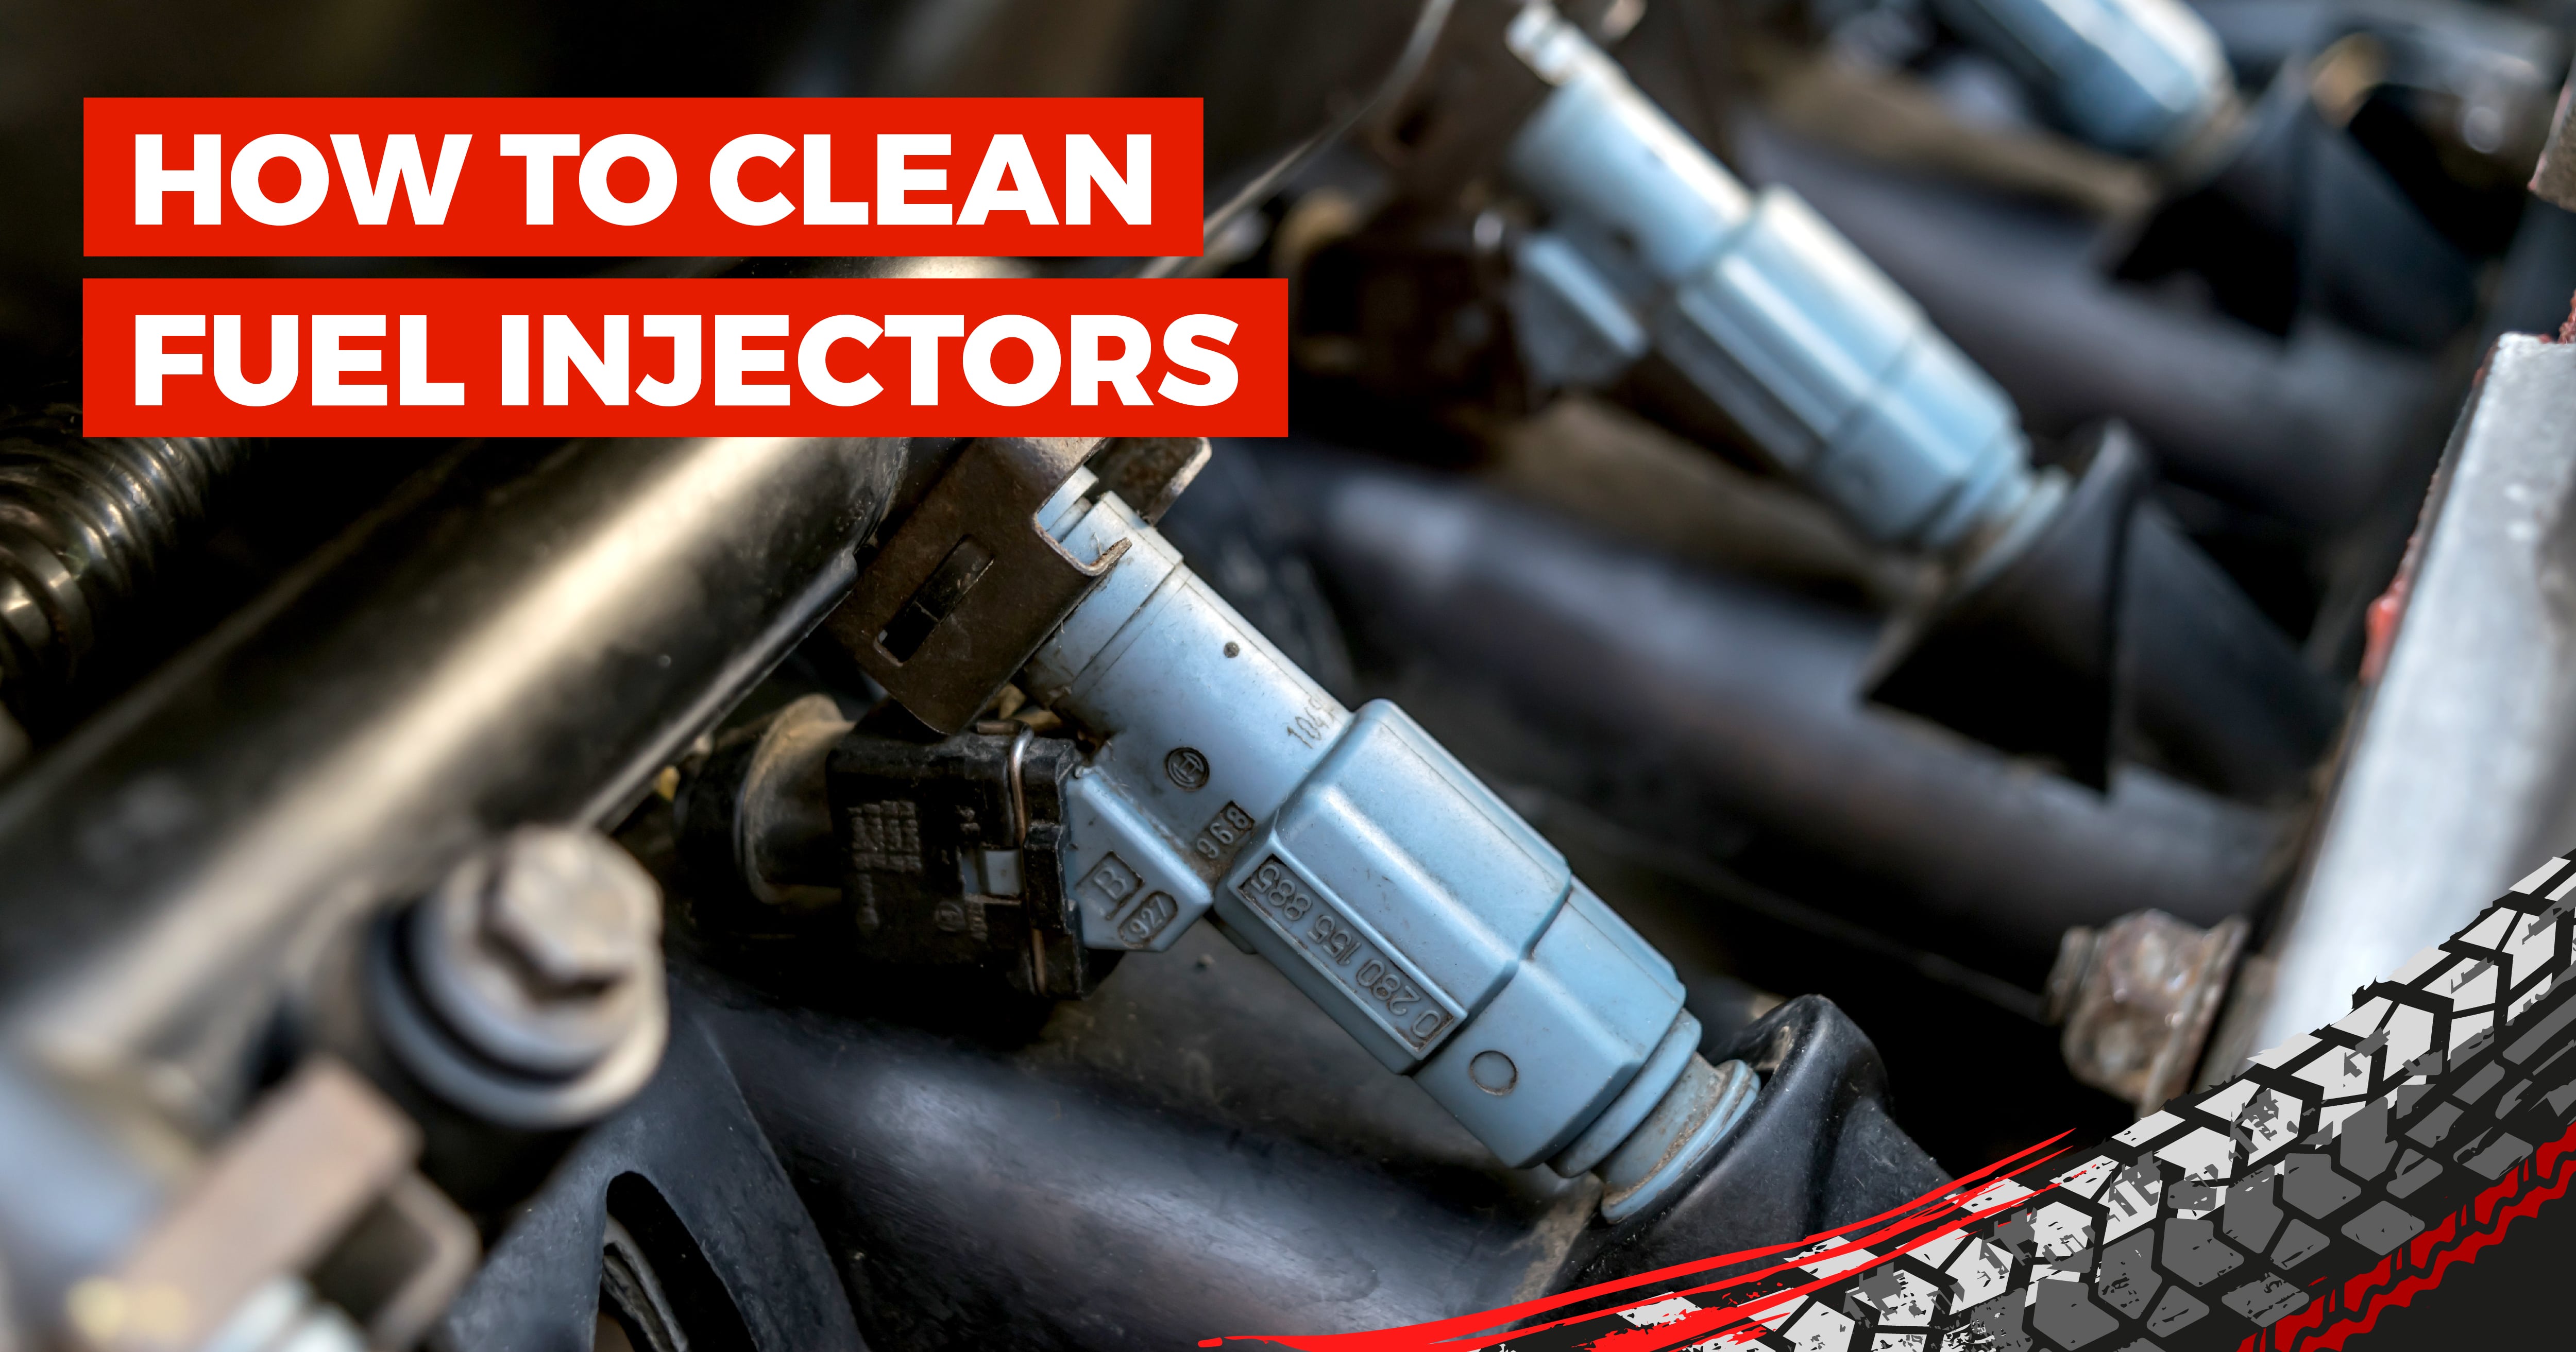 How To Clean Fuel Injectors